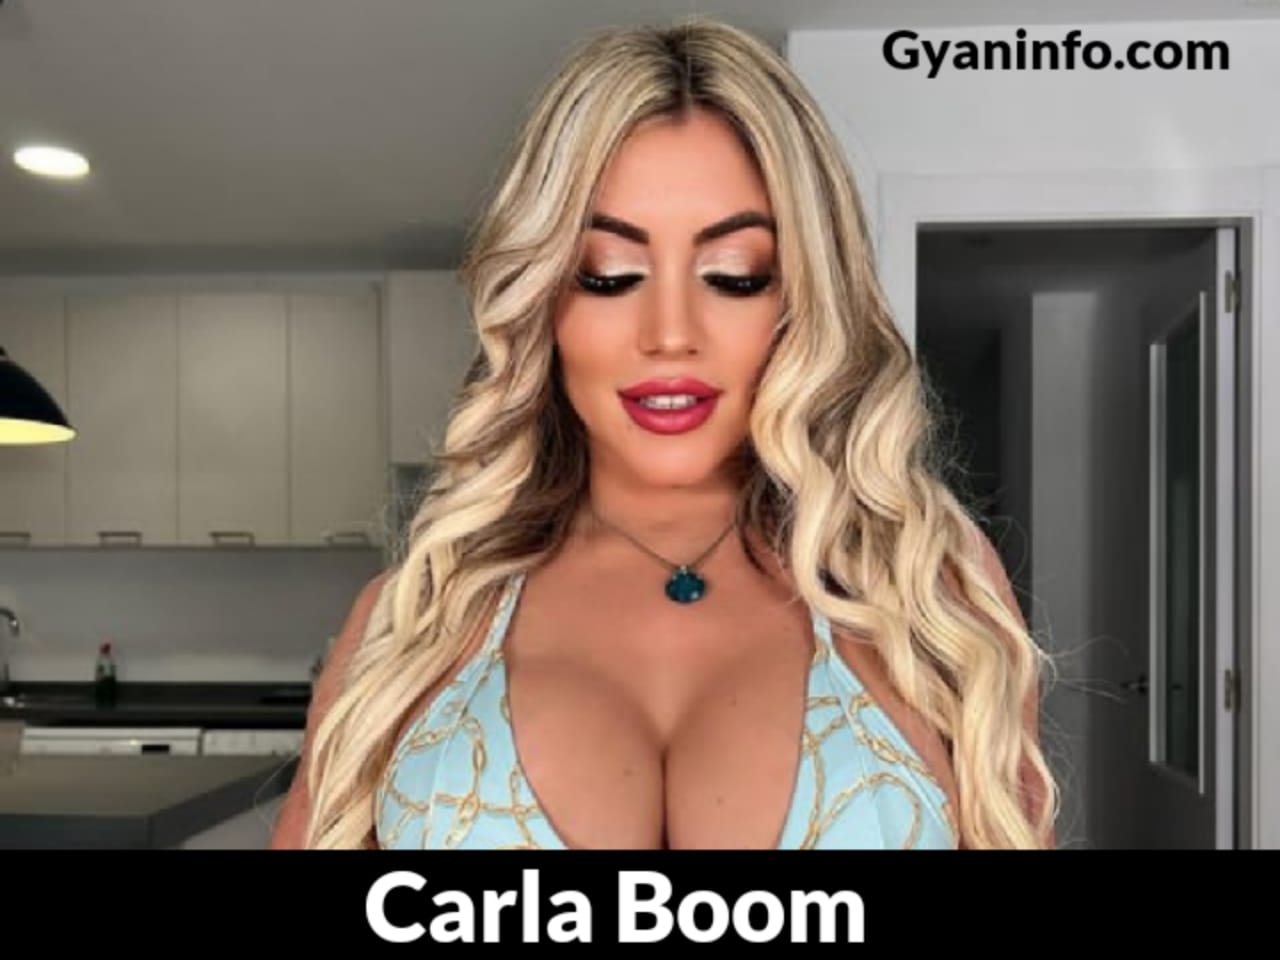 Carla Boom Biography, Height, Age, Weight, Video, Body Measurements, Family, Parents, Boyfriend, Husband, Bio, Net Worth, Photos, Wiki & More